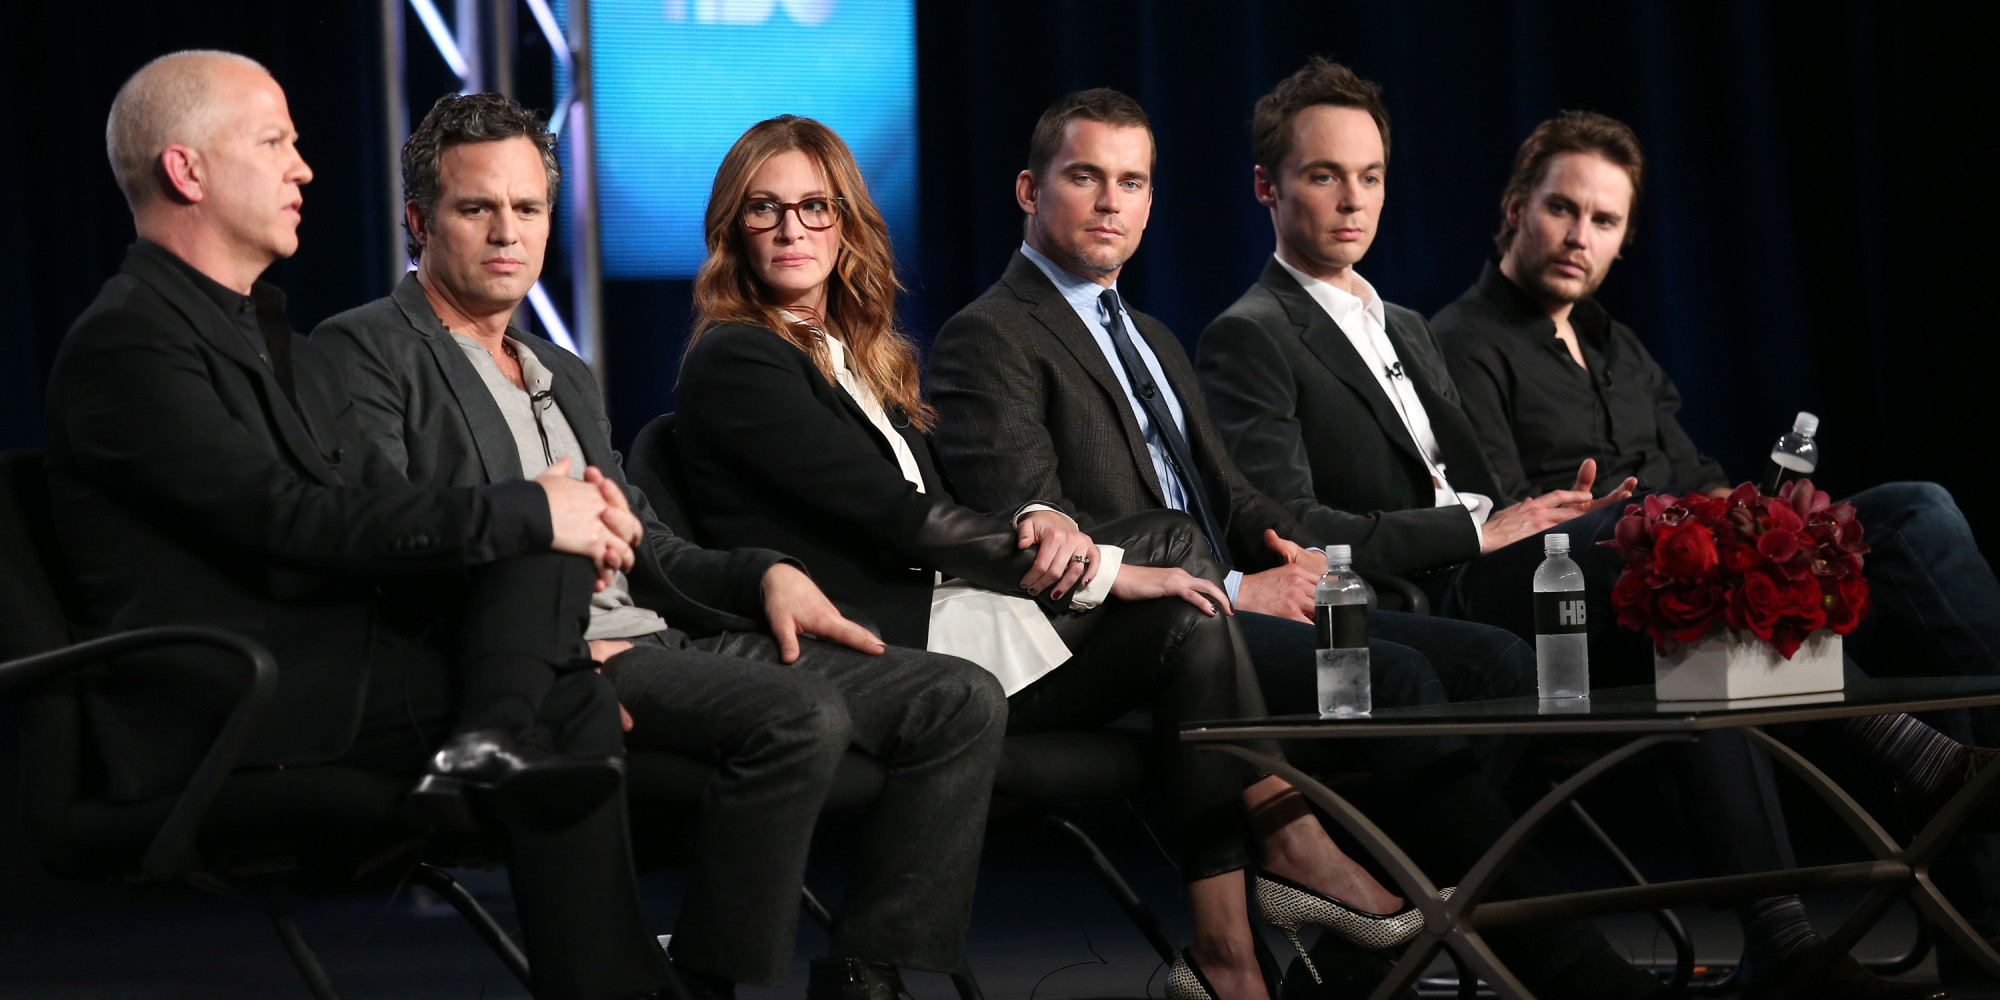 PASADENA, CA - JANUARY 09: (L-R) Director/Executive Producer Ryan Murphy, actors Mark Ruffalo, Julia Roberts, Matt Bomer, Jim Parsons and Taylor Kitsch speak onstage during the 'The Normal Heart' panel discussion at the HBO portion of the 2014 Winter Television Critics Association tour at the Langham Hotel on January 9, 2014 in Pasadena, California. (Photo by Frederick M. Brown/Getty Images)